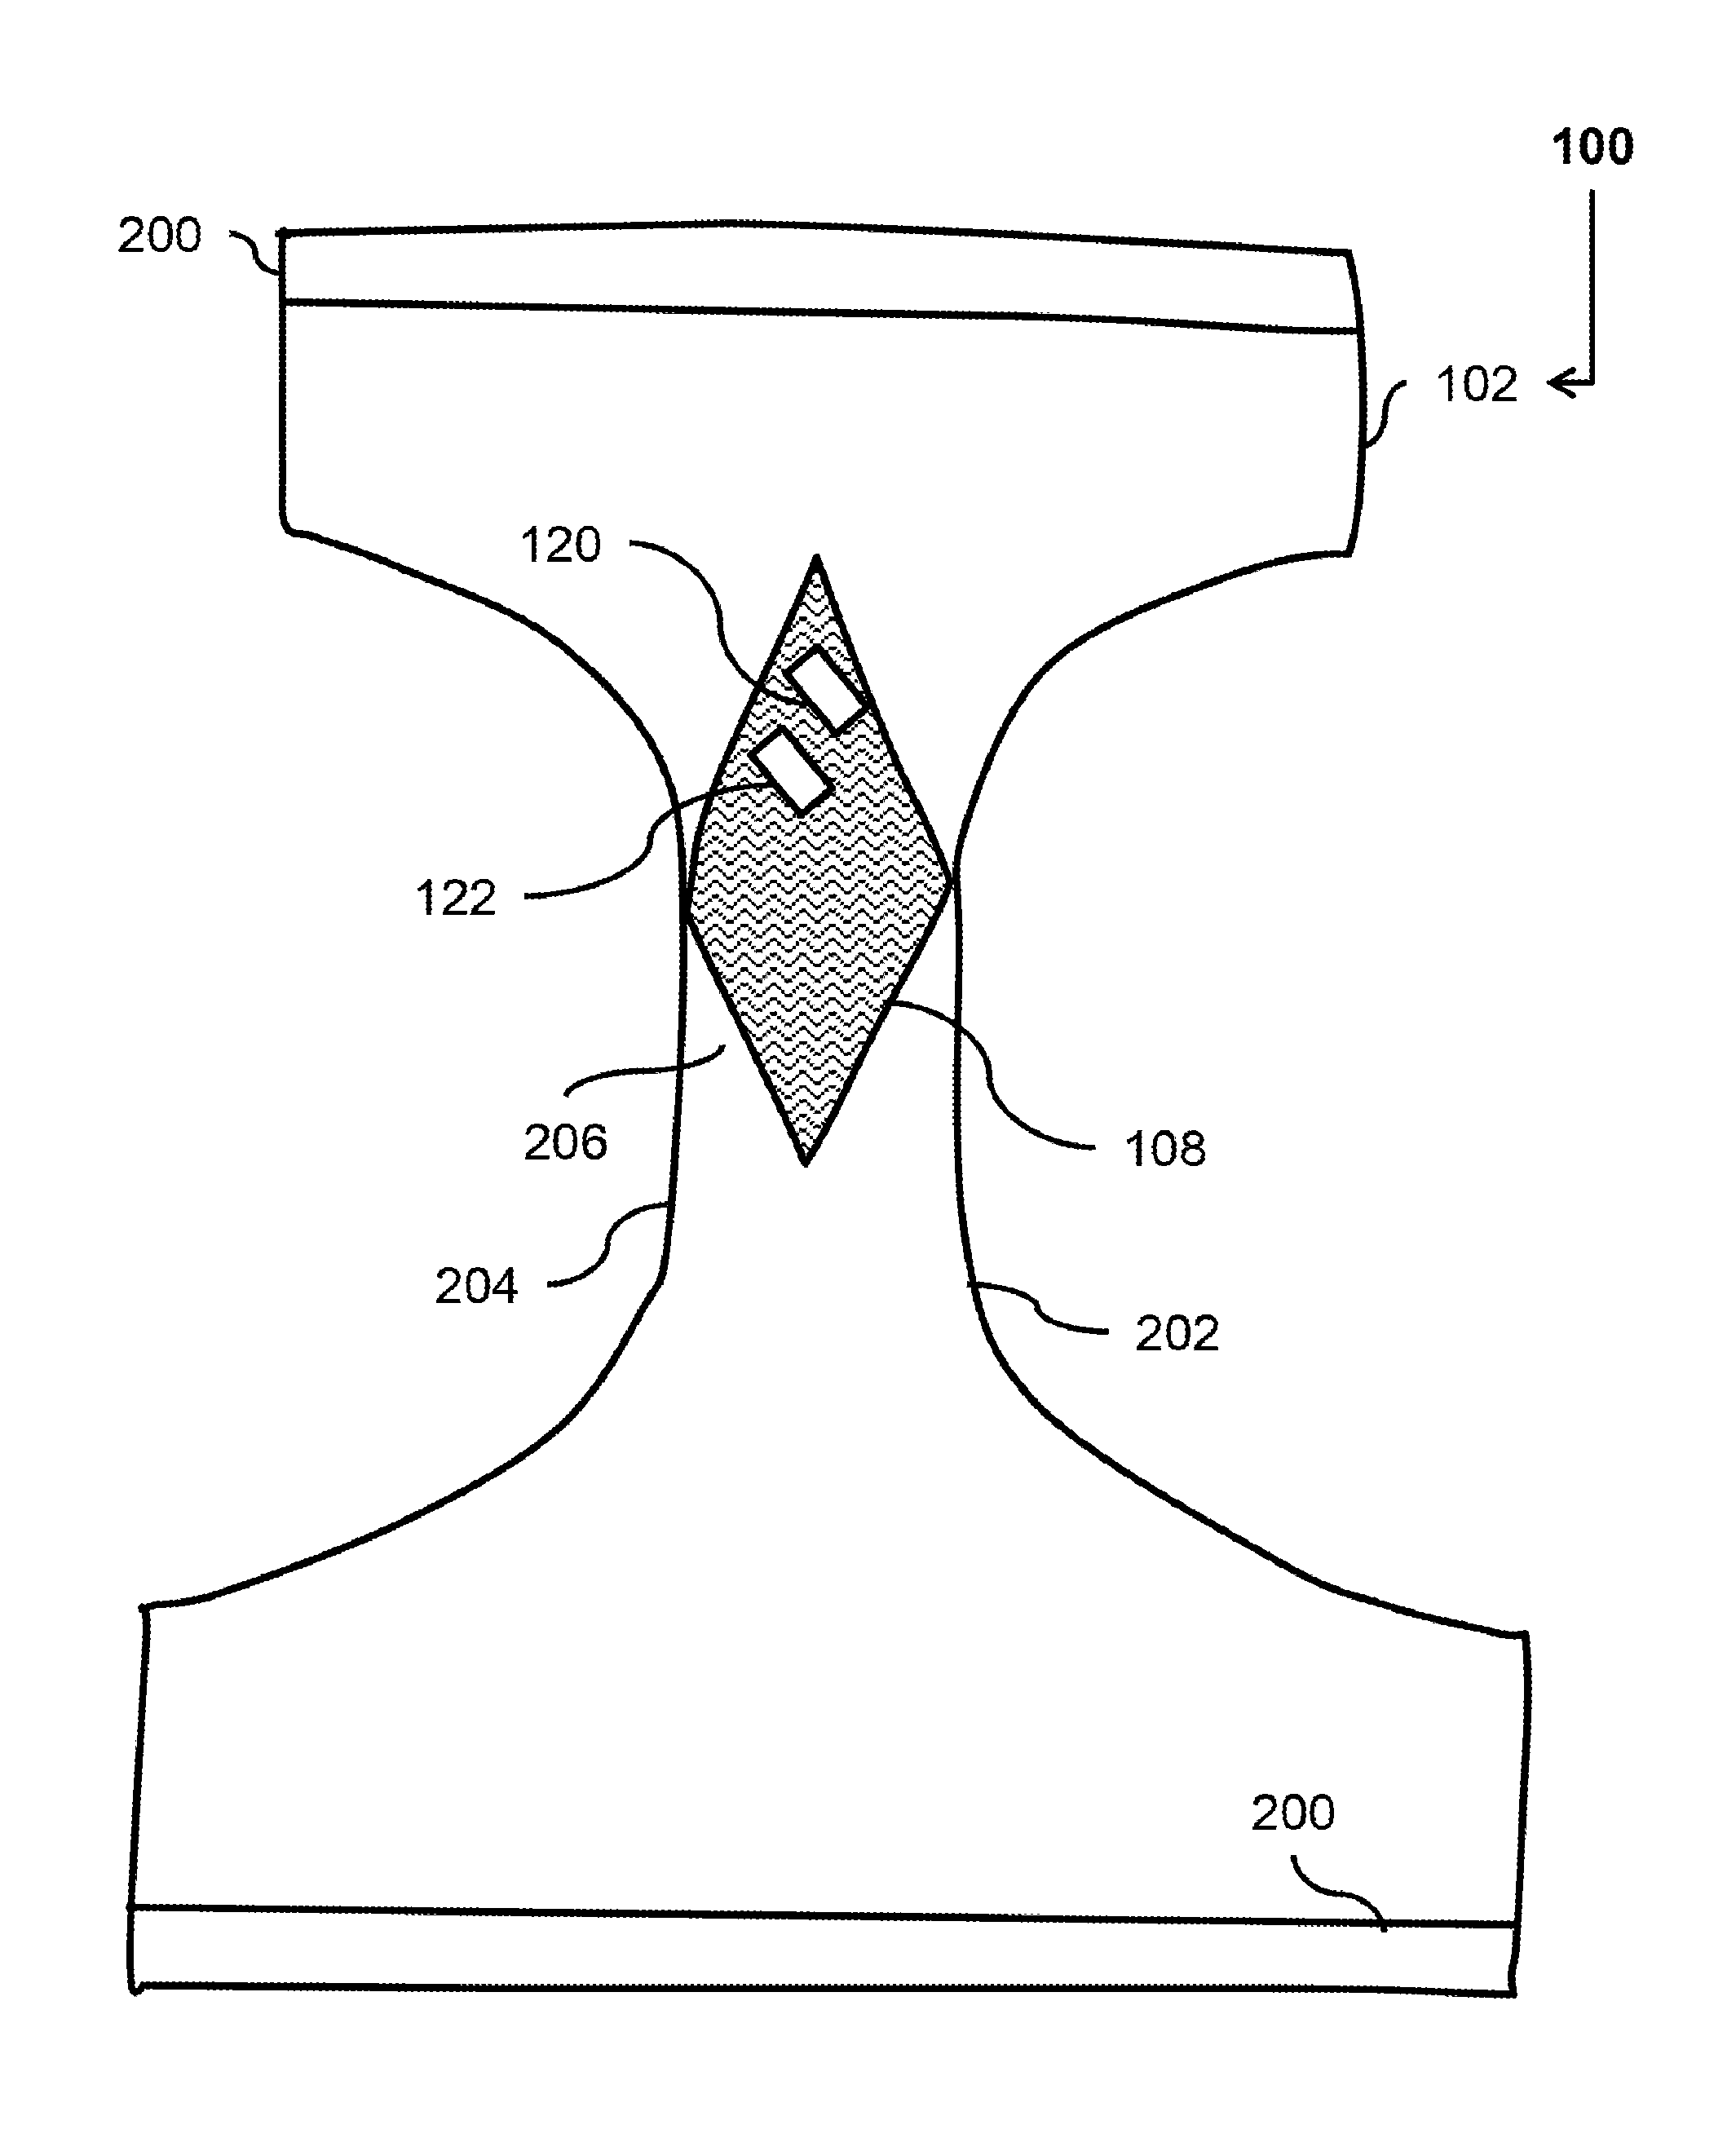 Apparatus for sexual activity usage